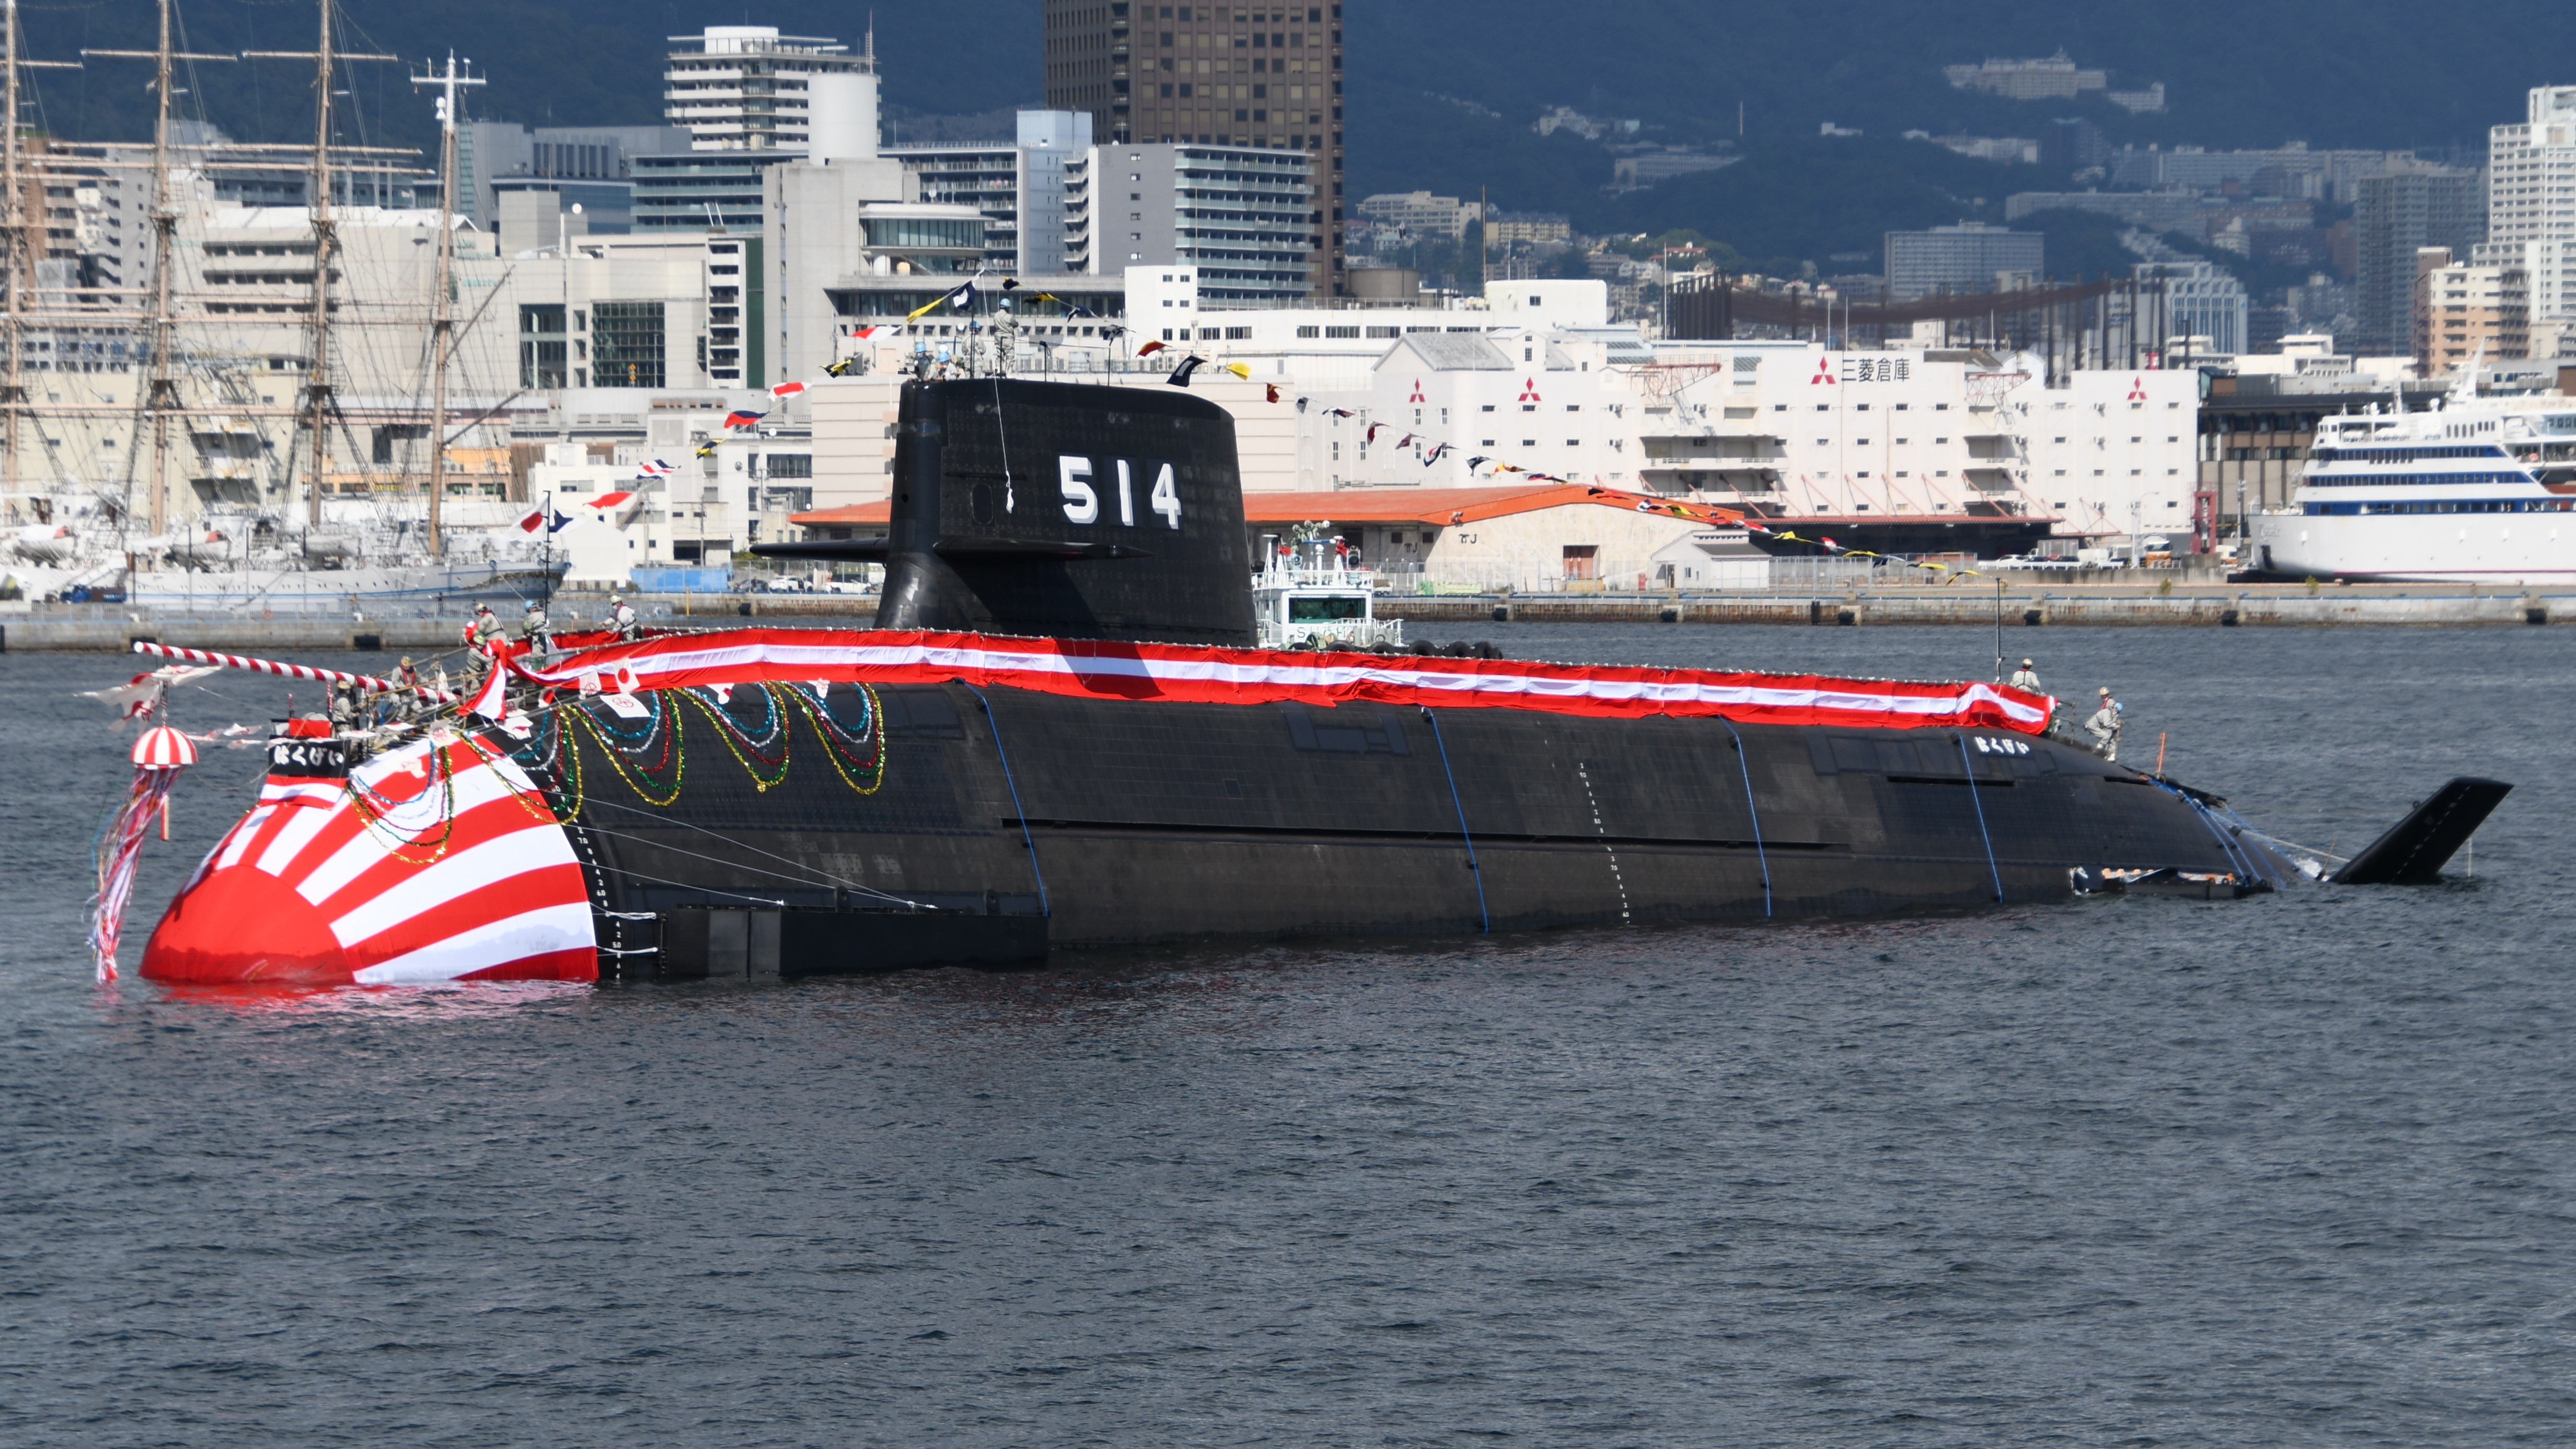 Japan has the world's first lithium-ion battery-powered submarine - worth $5.4bn and capable of carrying up to 30 missiles